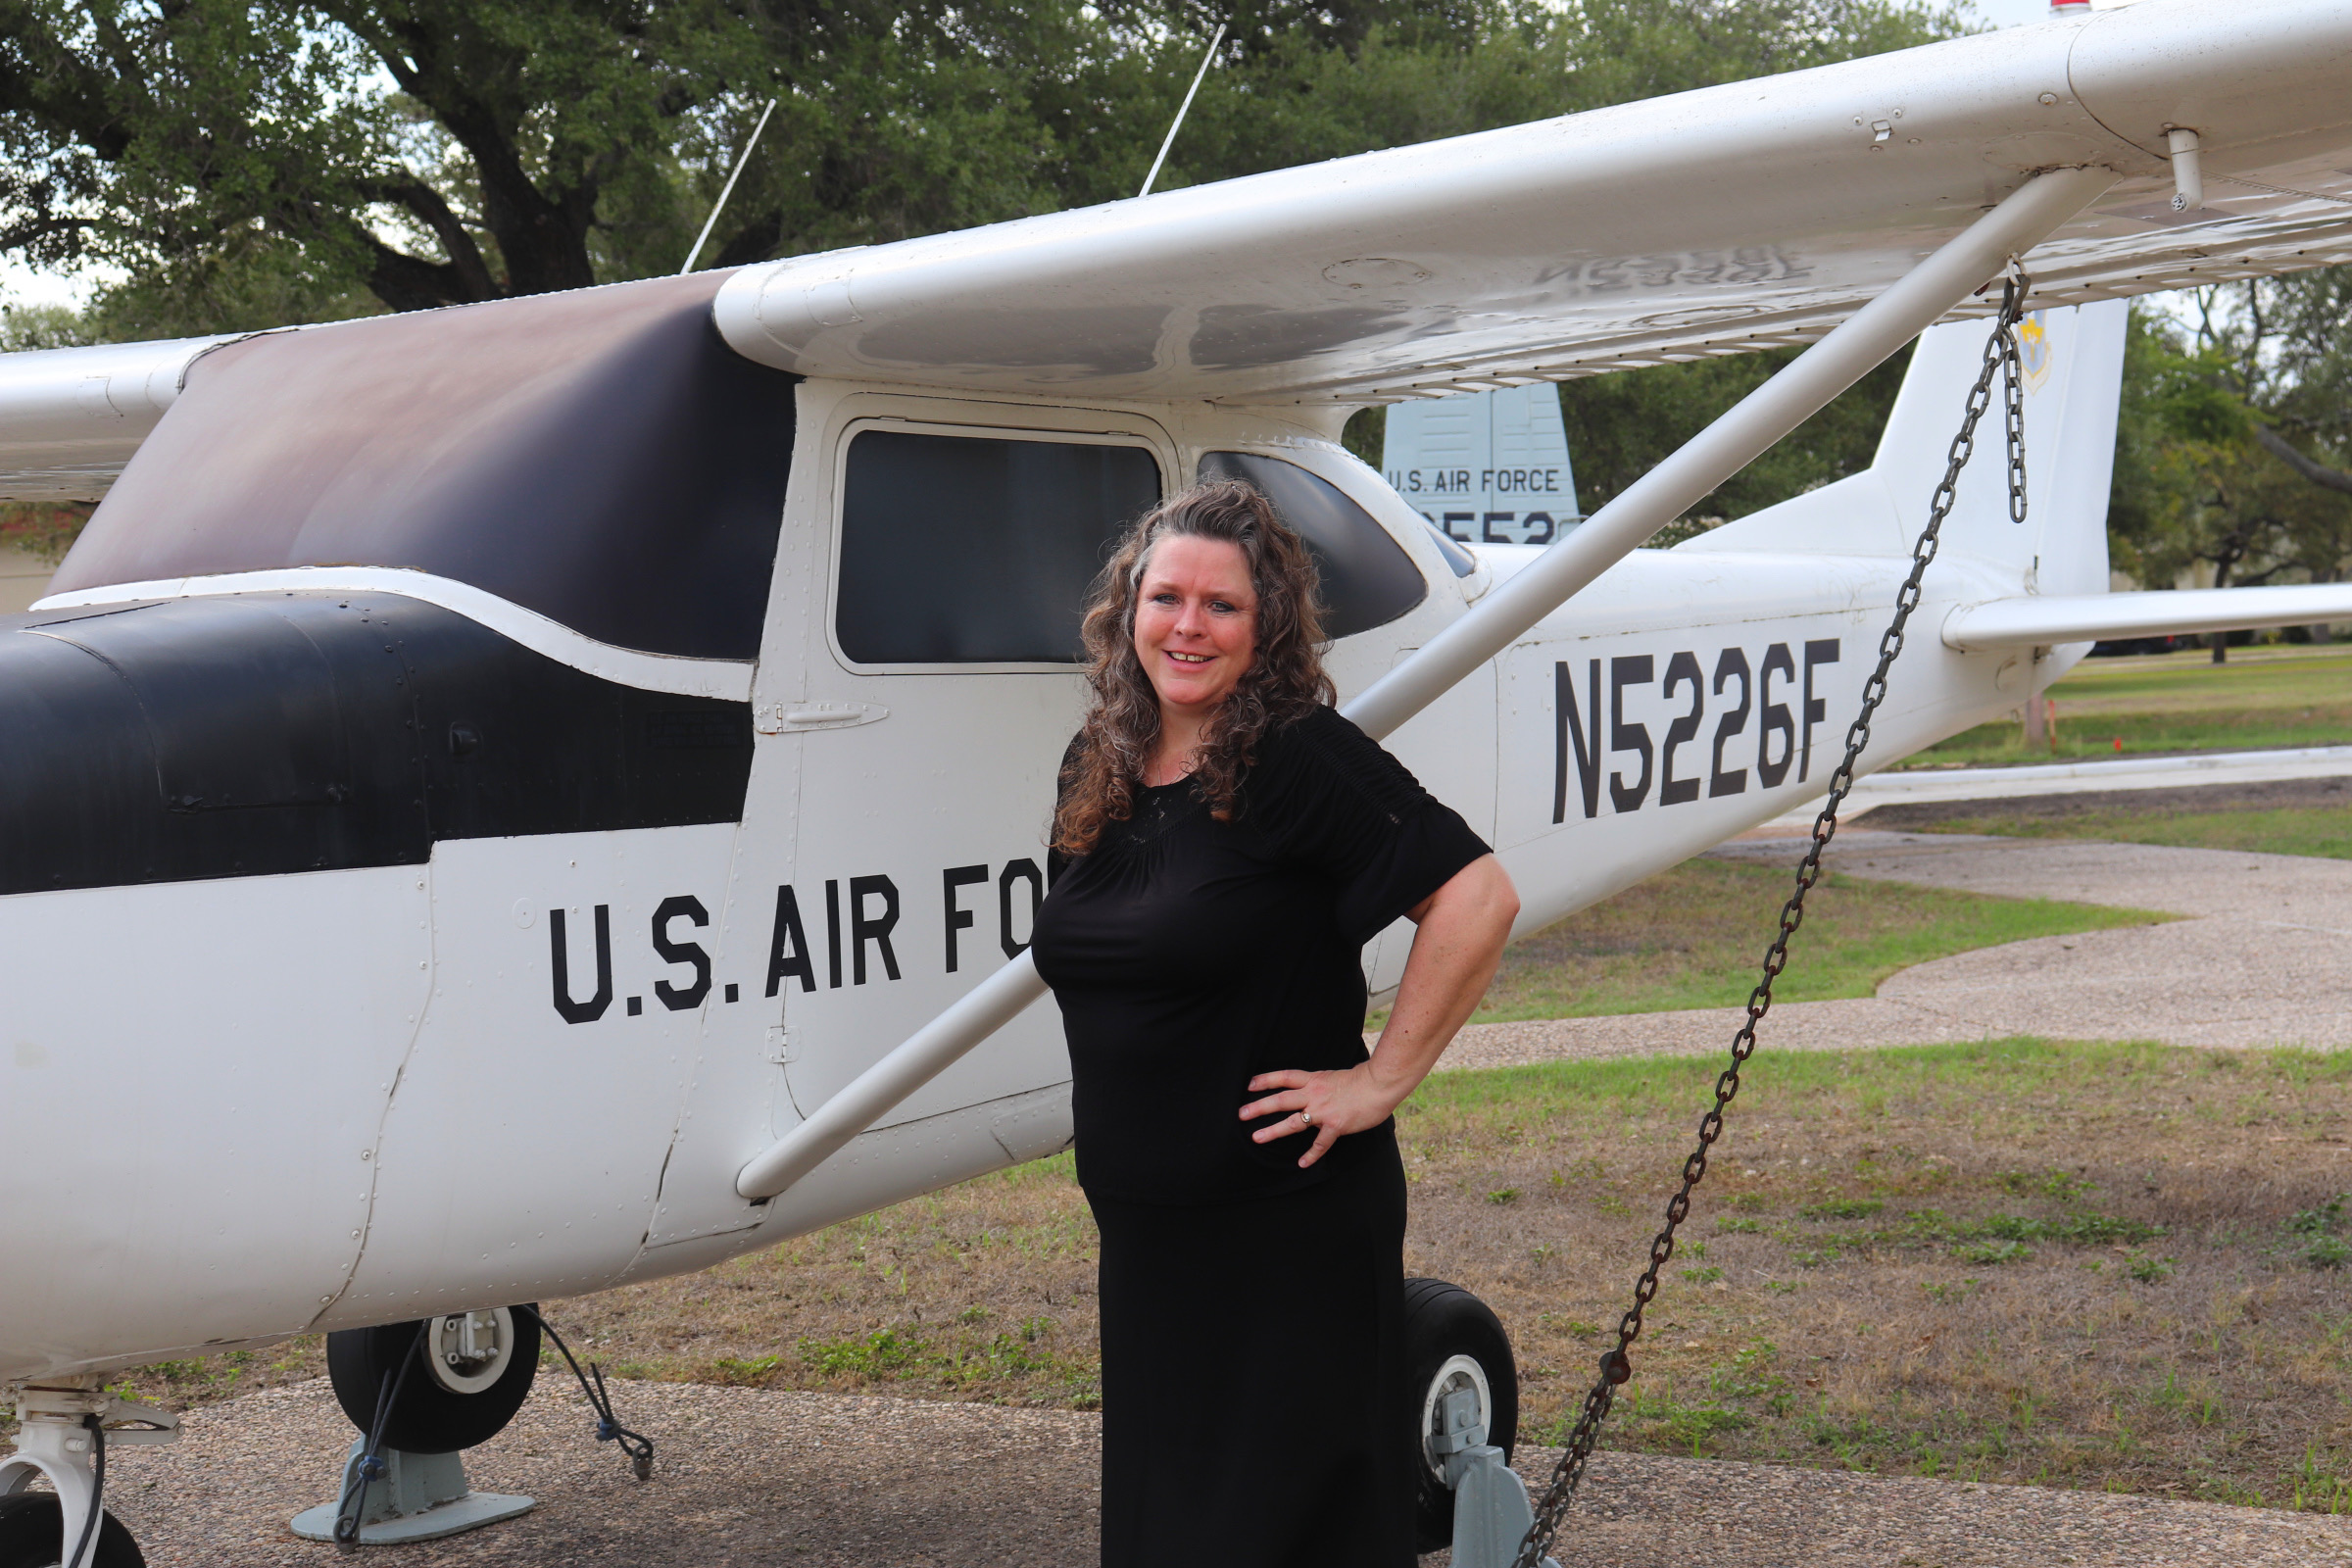 Image of Barbi standing in front of a plane